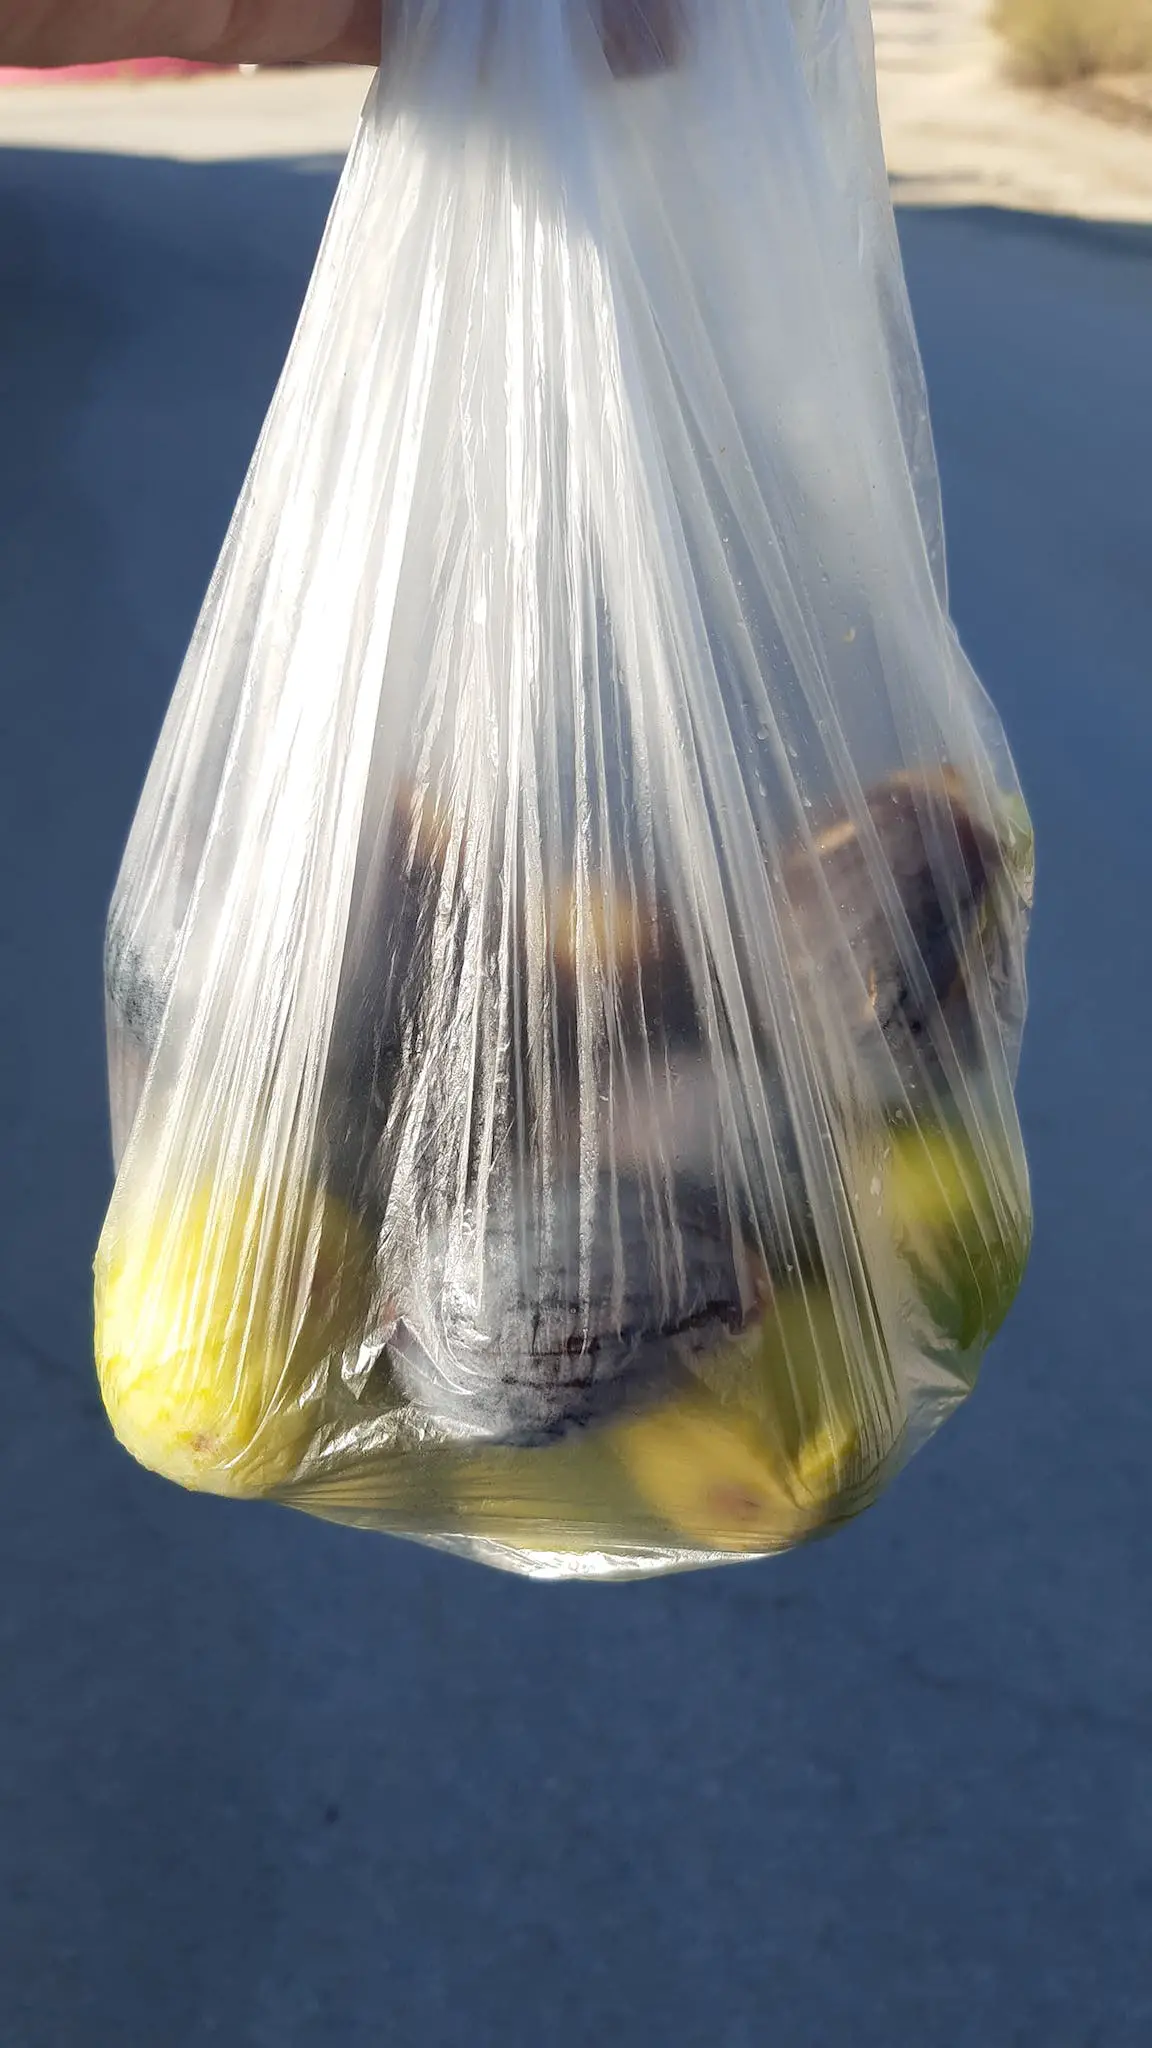 Boiling Food in a Bag